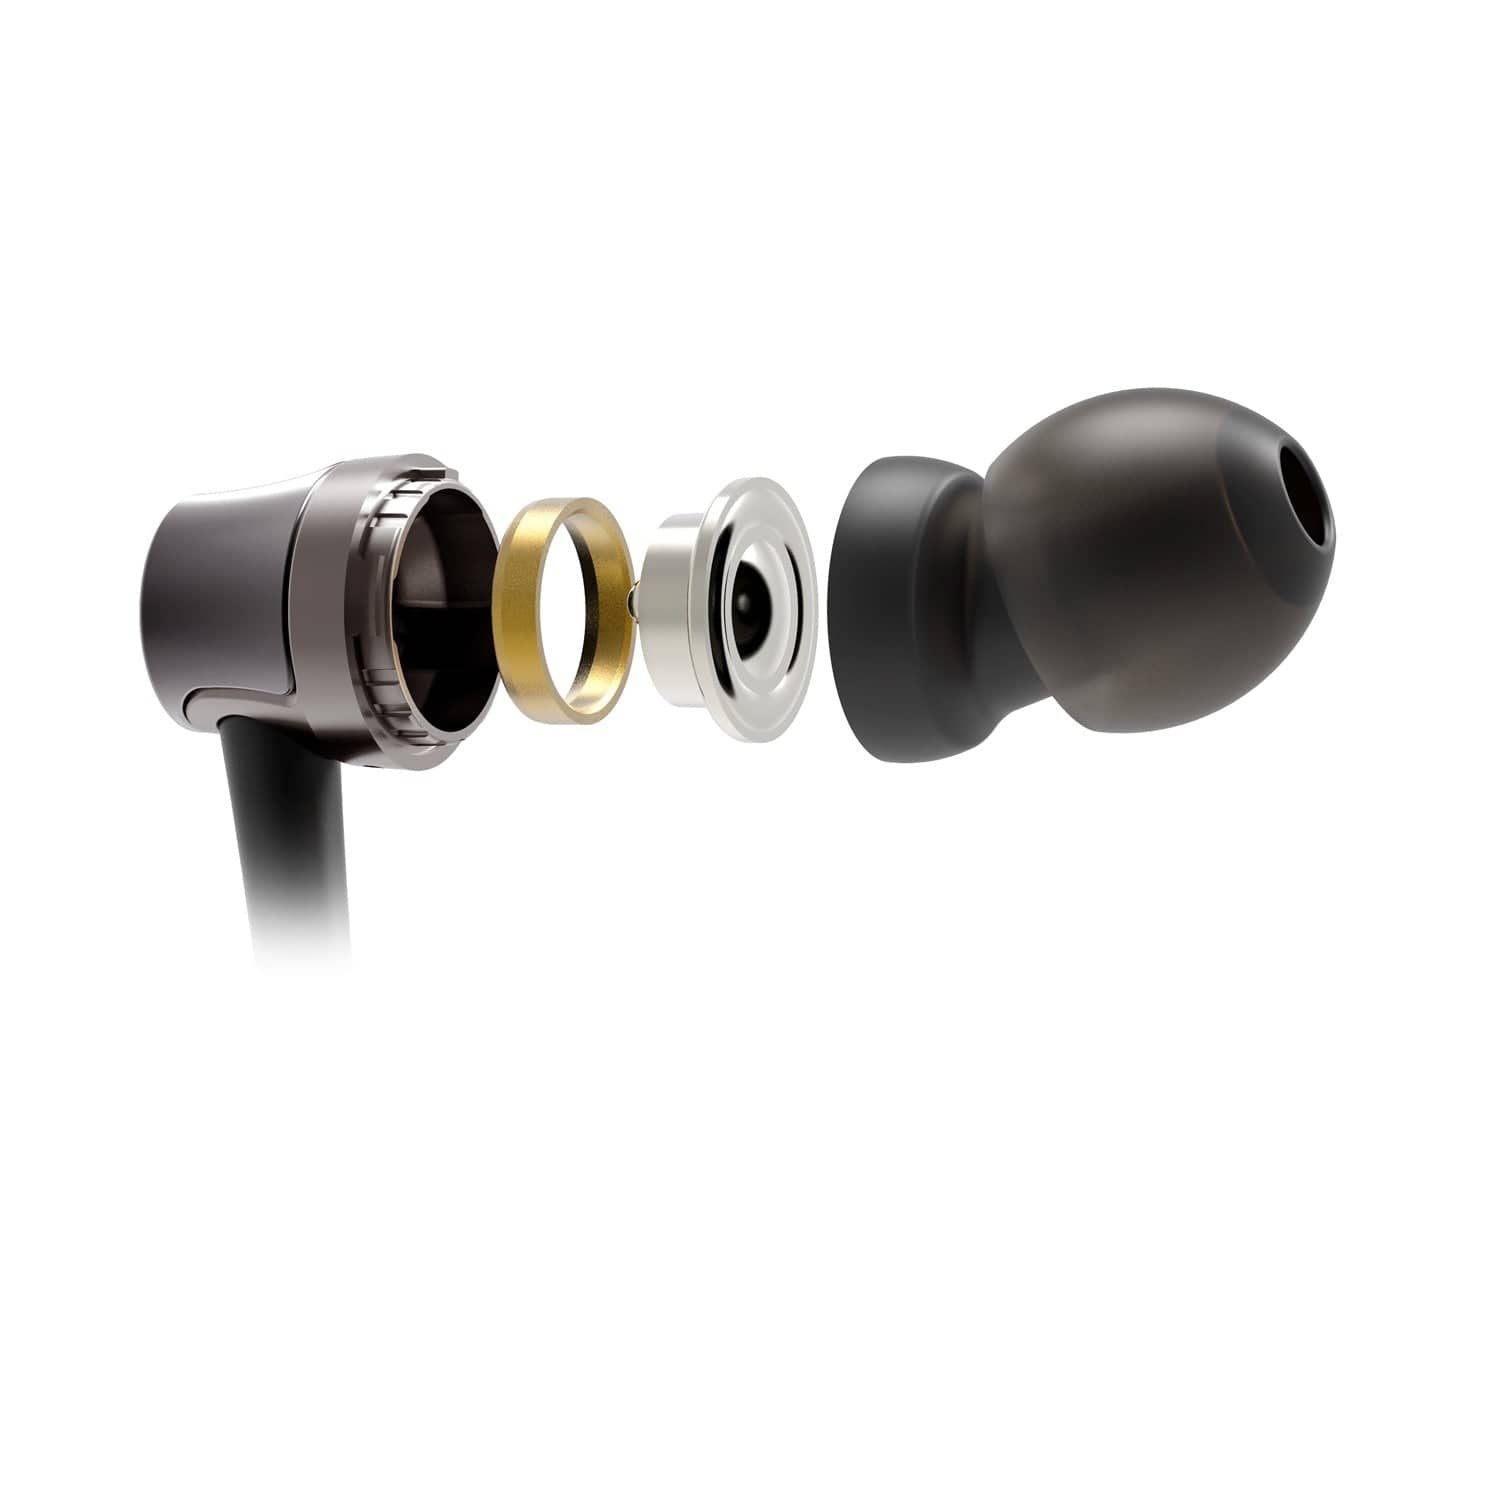 Audio-Technica ATH-CKD3C USB Type-C In-Ear Earbuds